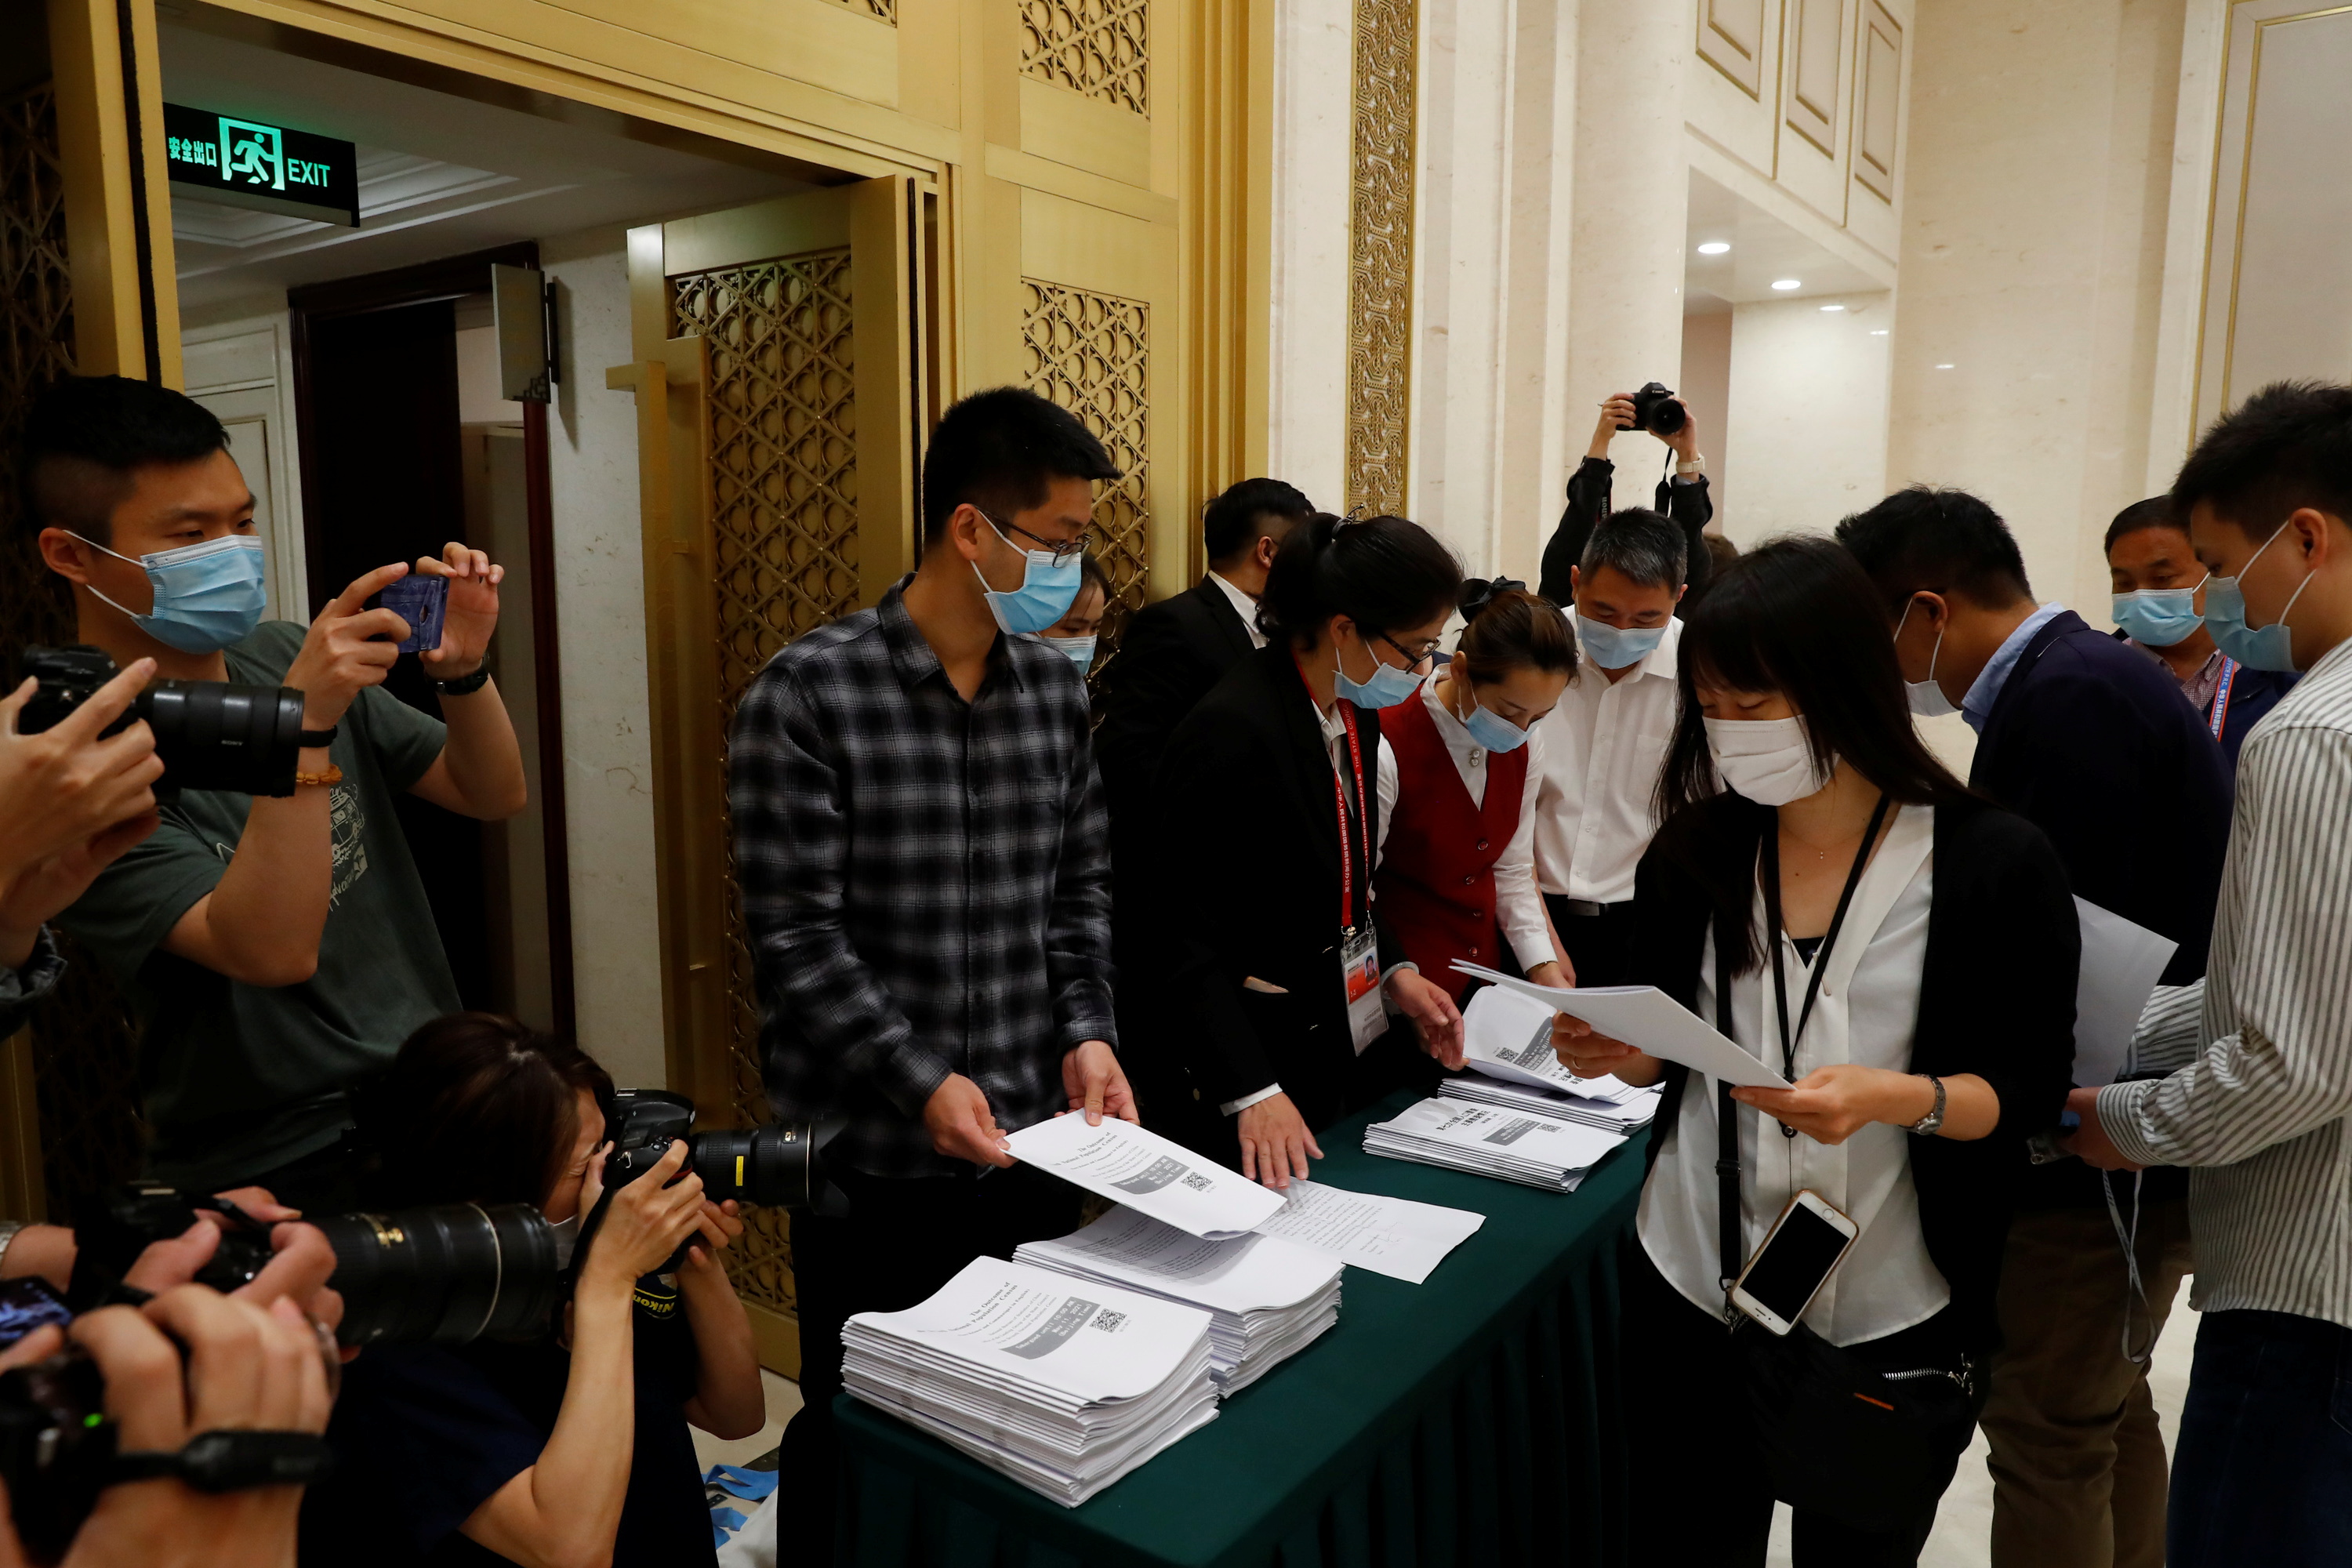 Journalists pick up a copy of China's National Bureau of Statistics population census report before a news conference in Beijing